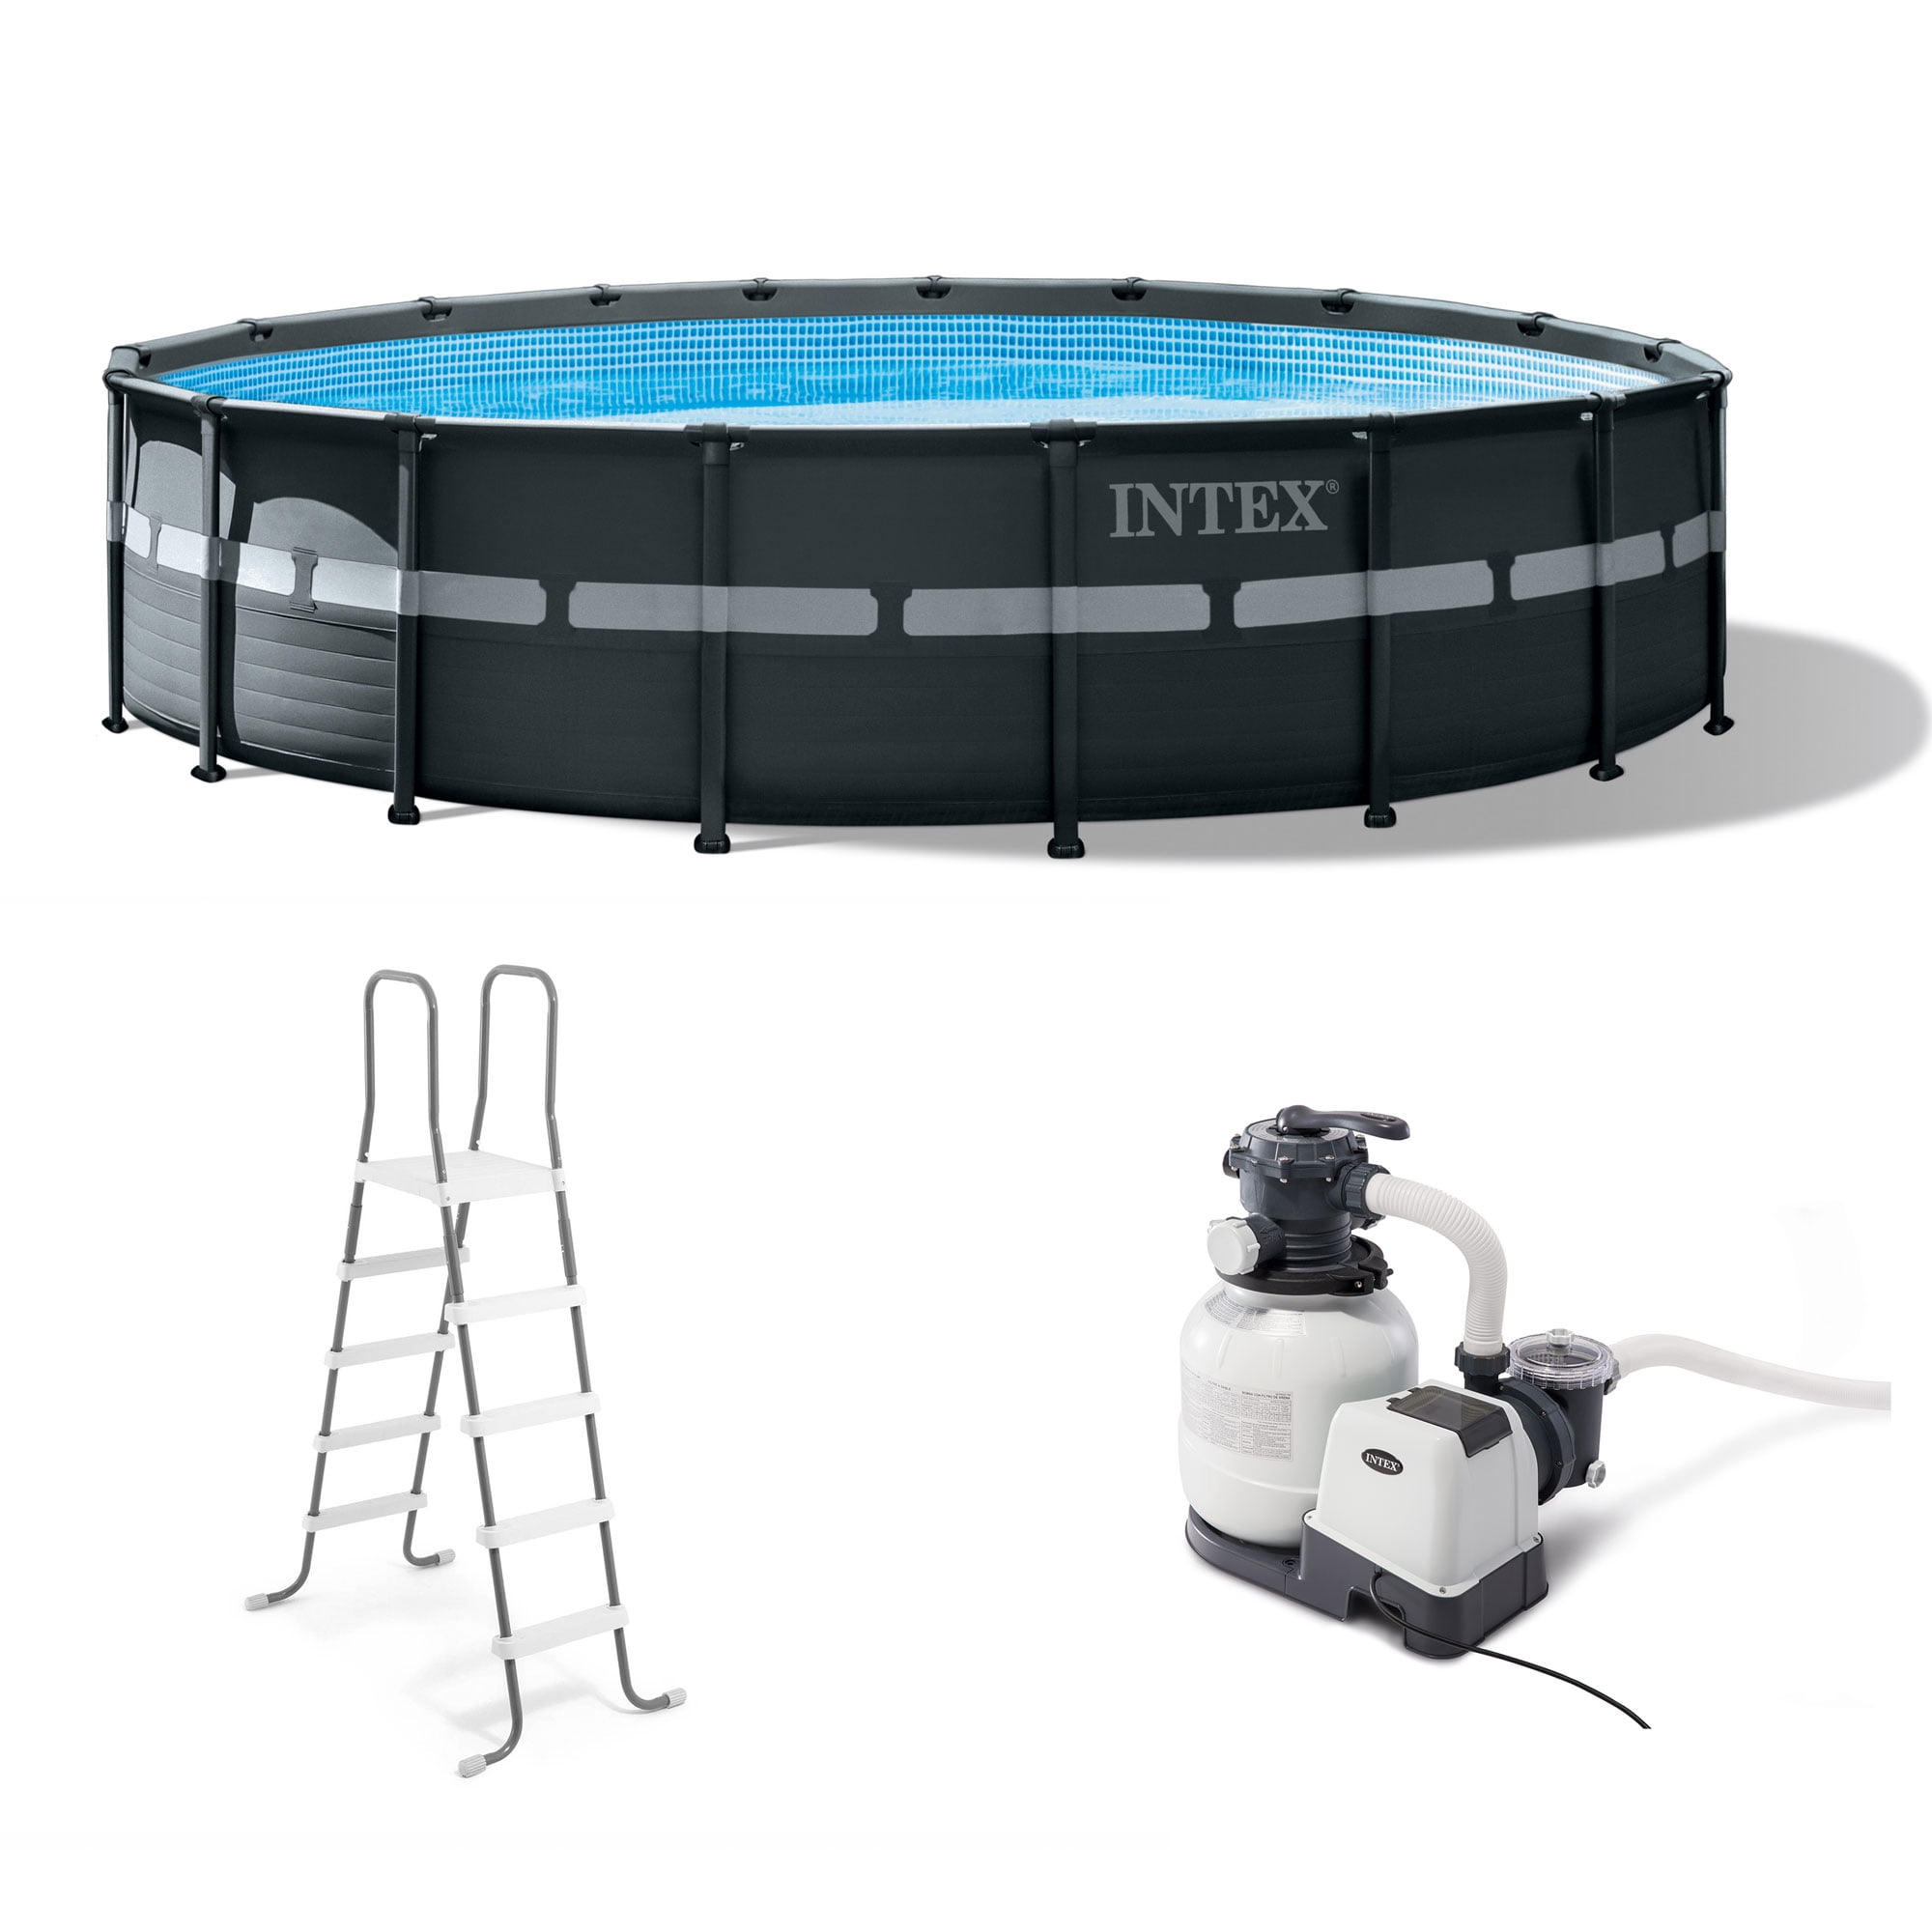 Intex 18Ft x 52″ Ultra XTR Frame Round Above Ground Swimming Pool Set with Pump